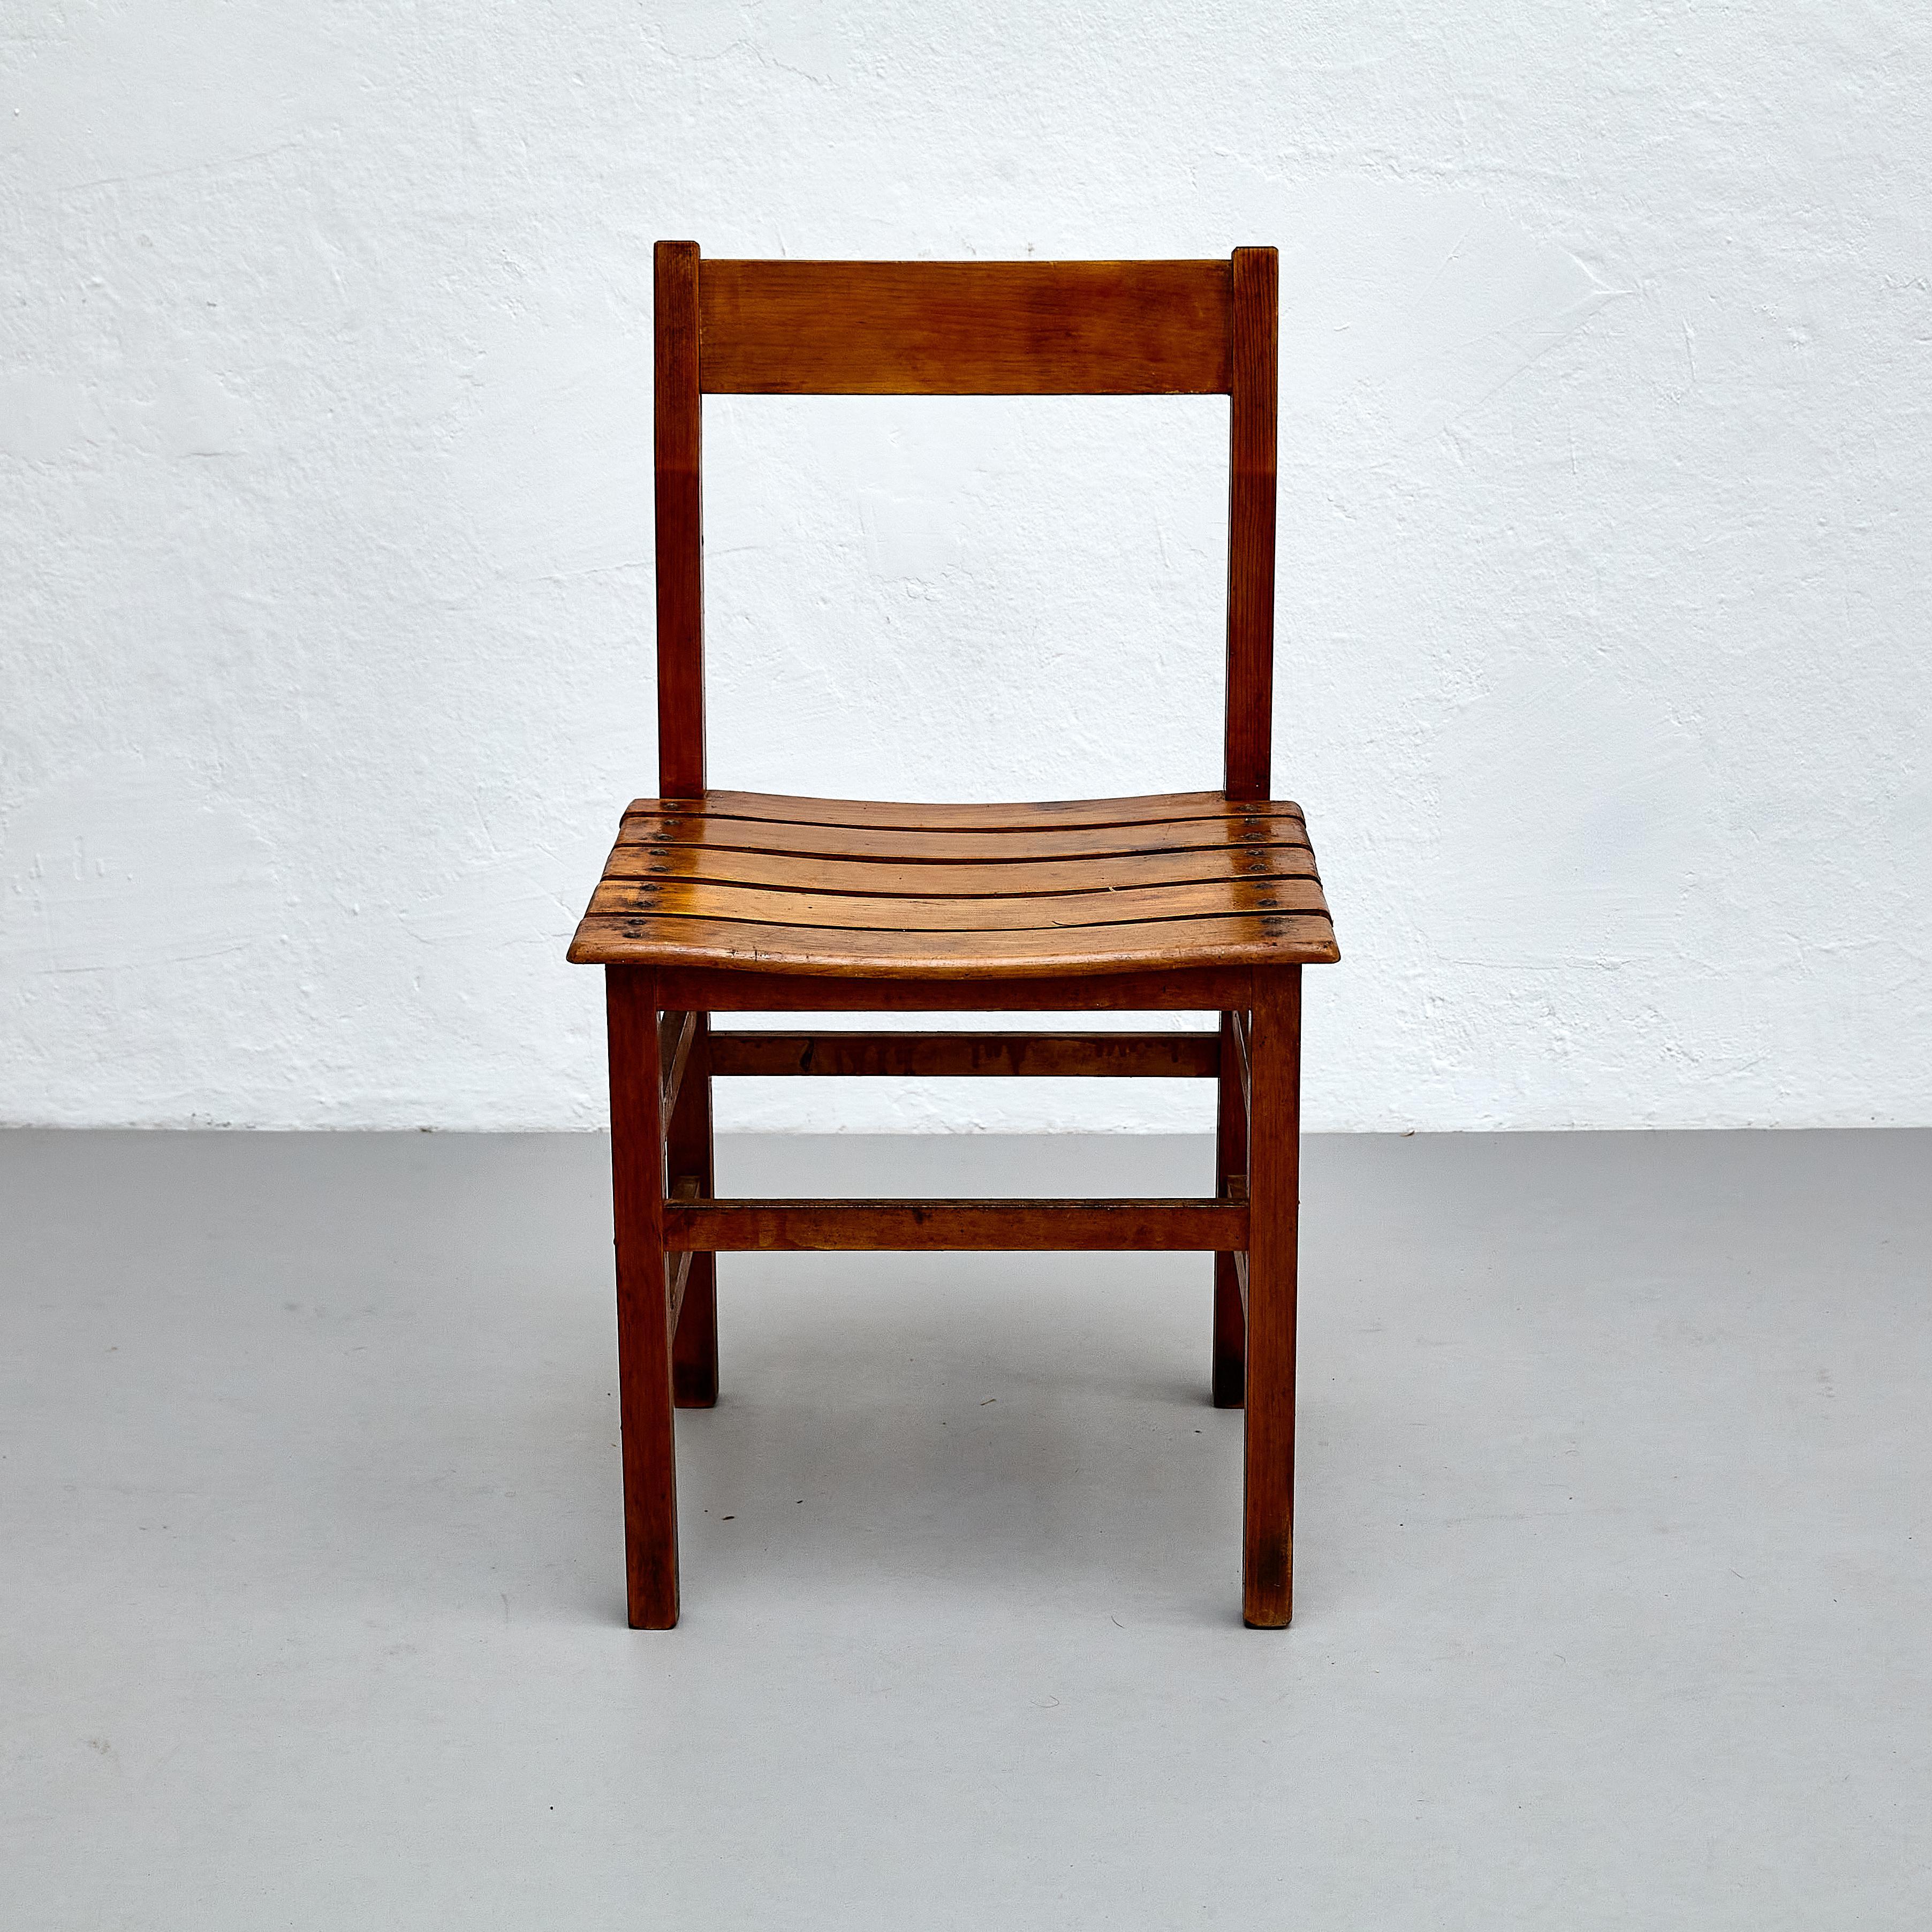 Set of Four Mid-Century Modern Rationalist Wood Chairs, Rustic Charm, circa 1960 For Sale 3